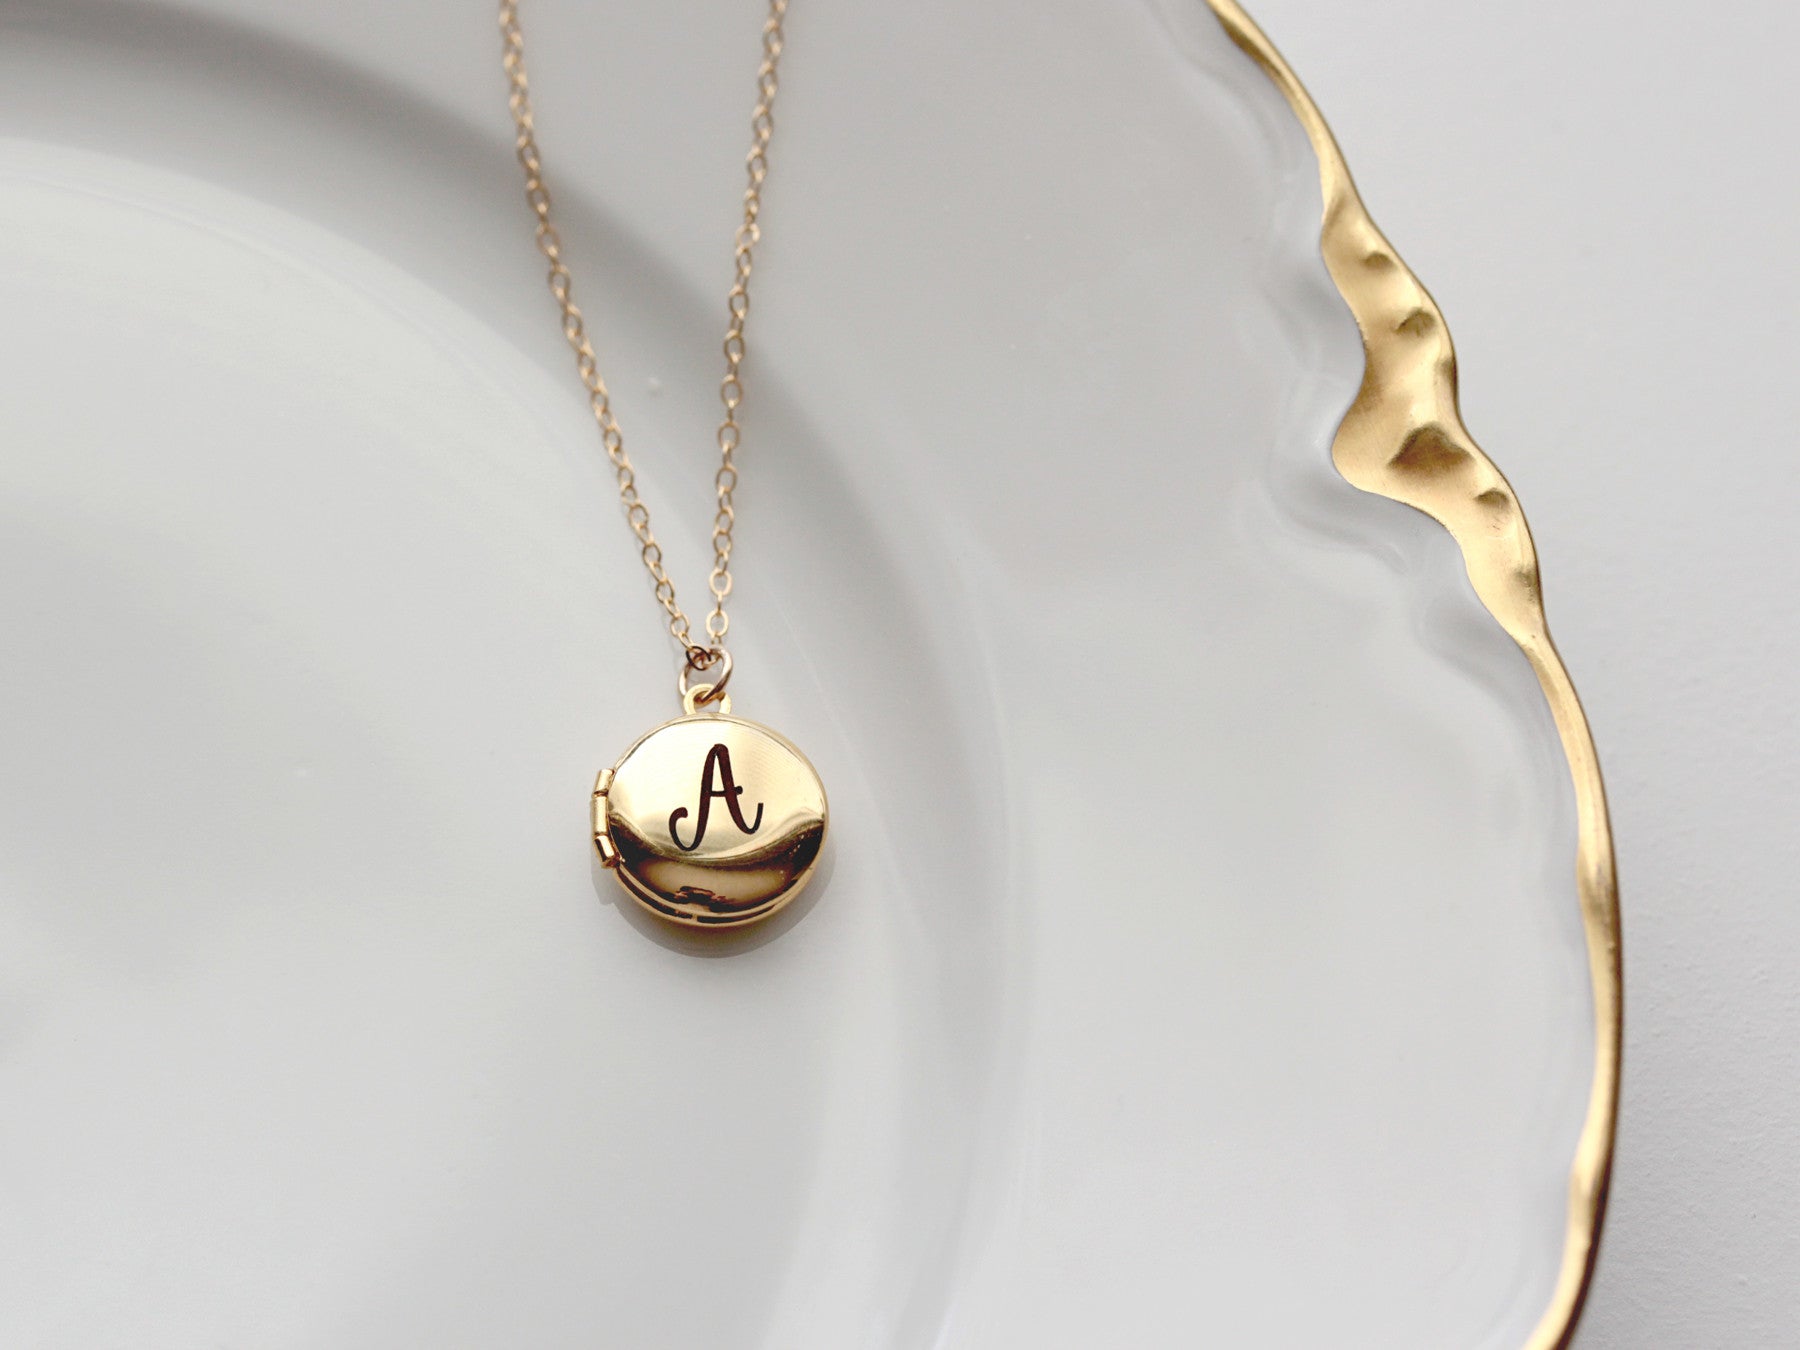 Buy Personalised Locket Necklace, Engraved for Women or Girls, Silver, Rose  Gold or Yellow Gold, Engraving Any Name Online in India - Etsy